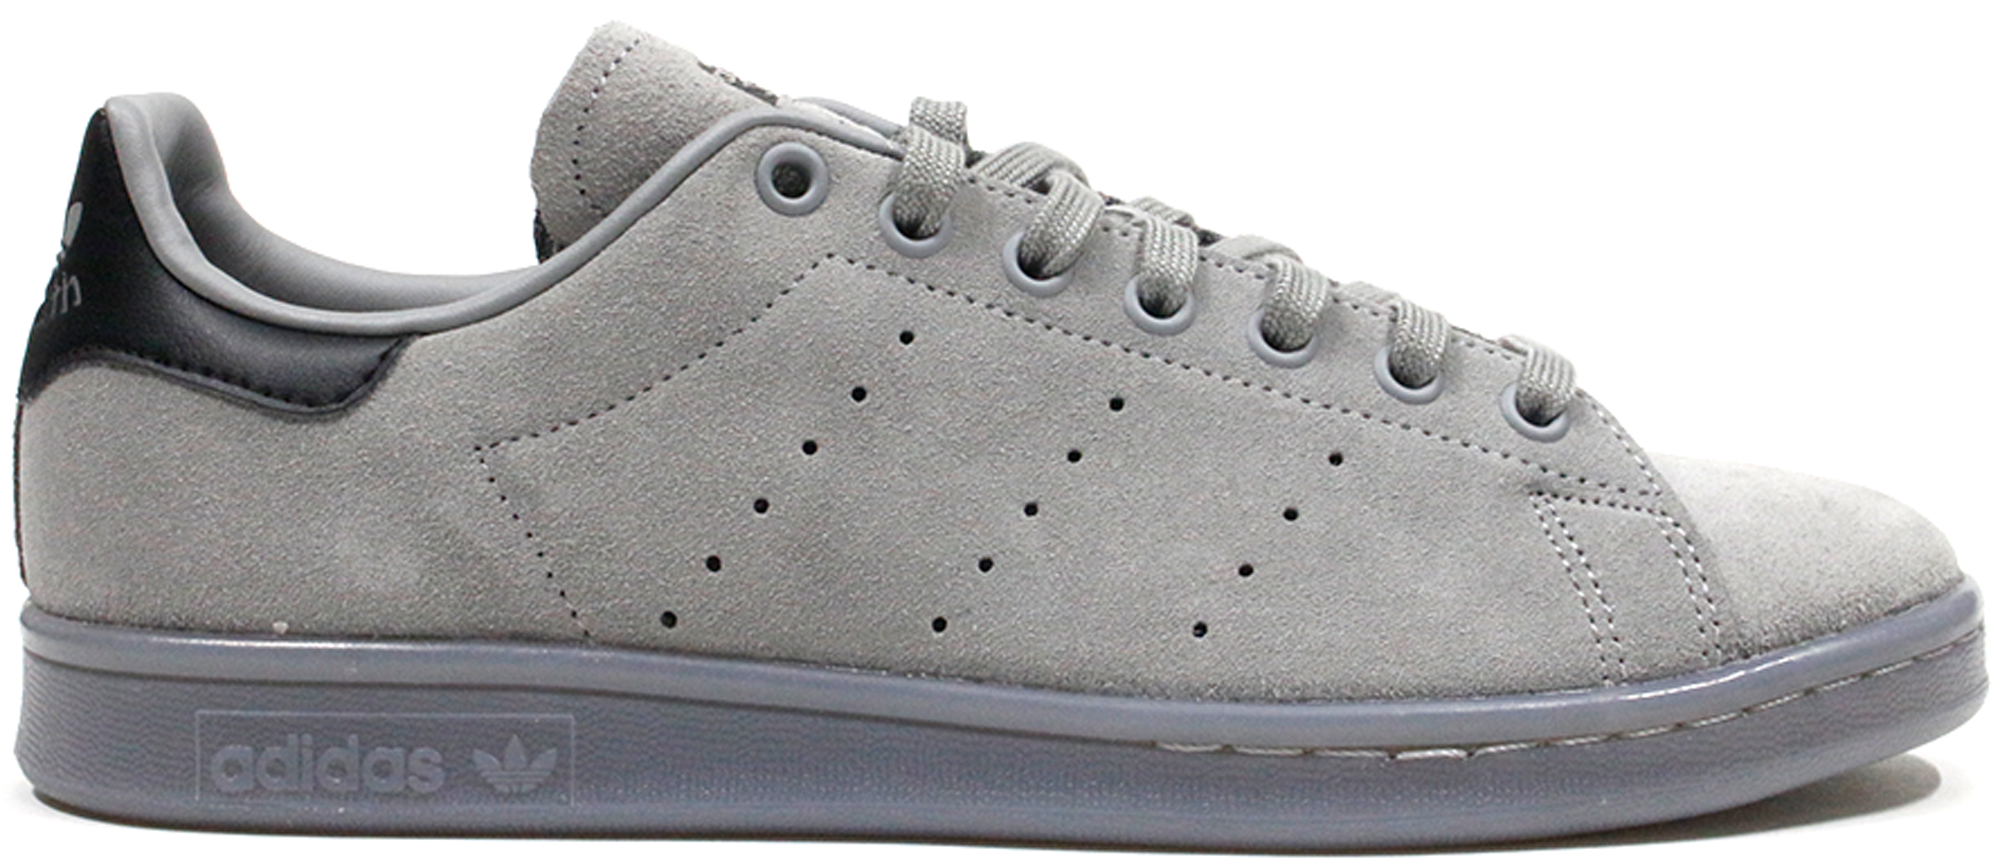 grey stan smith shoes